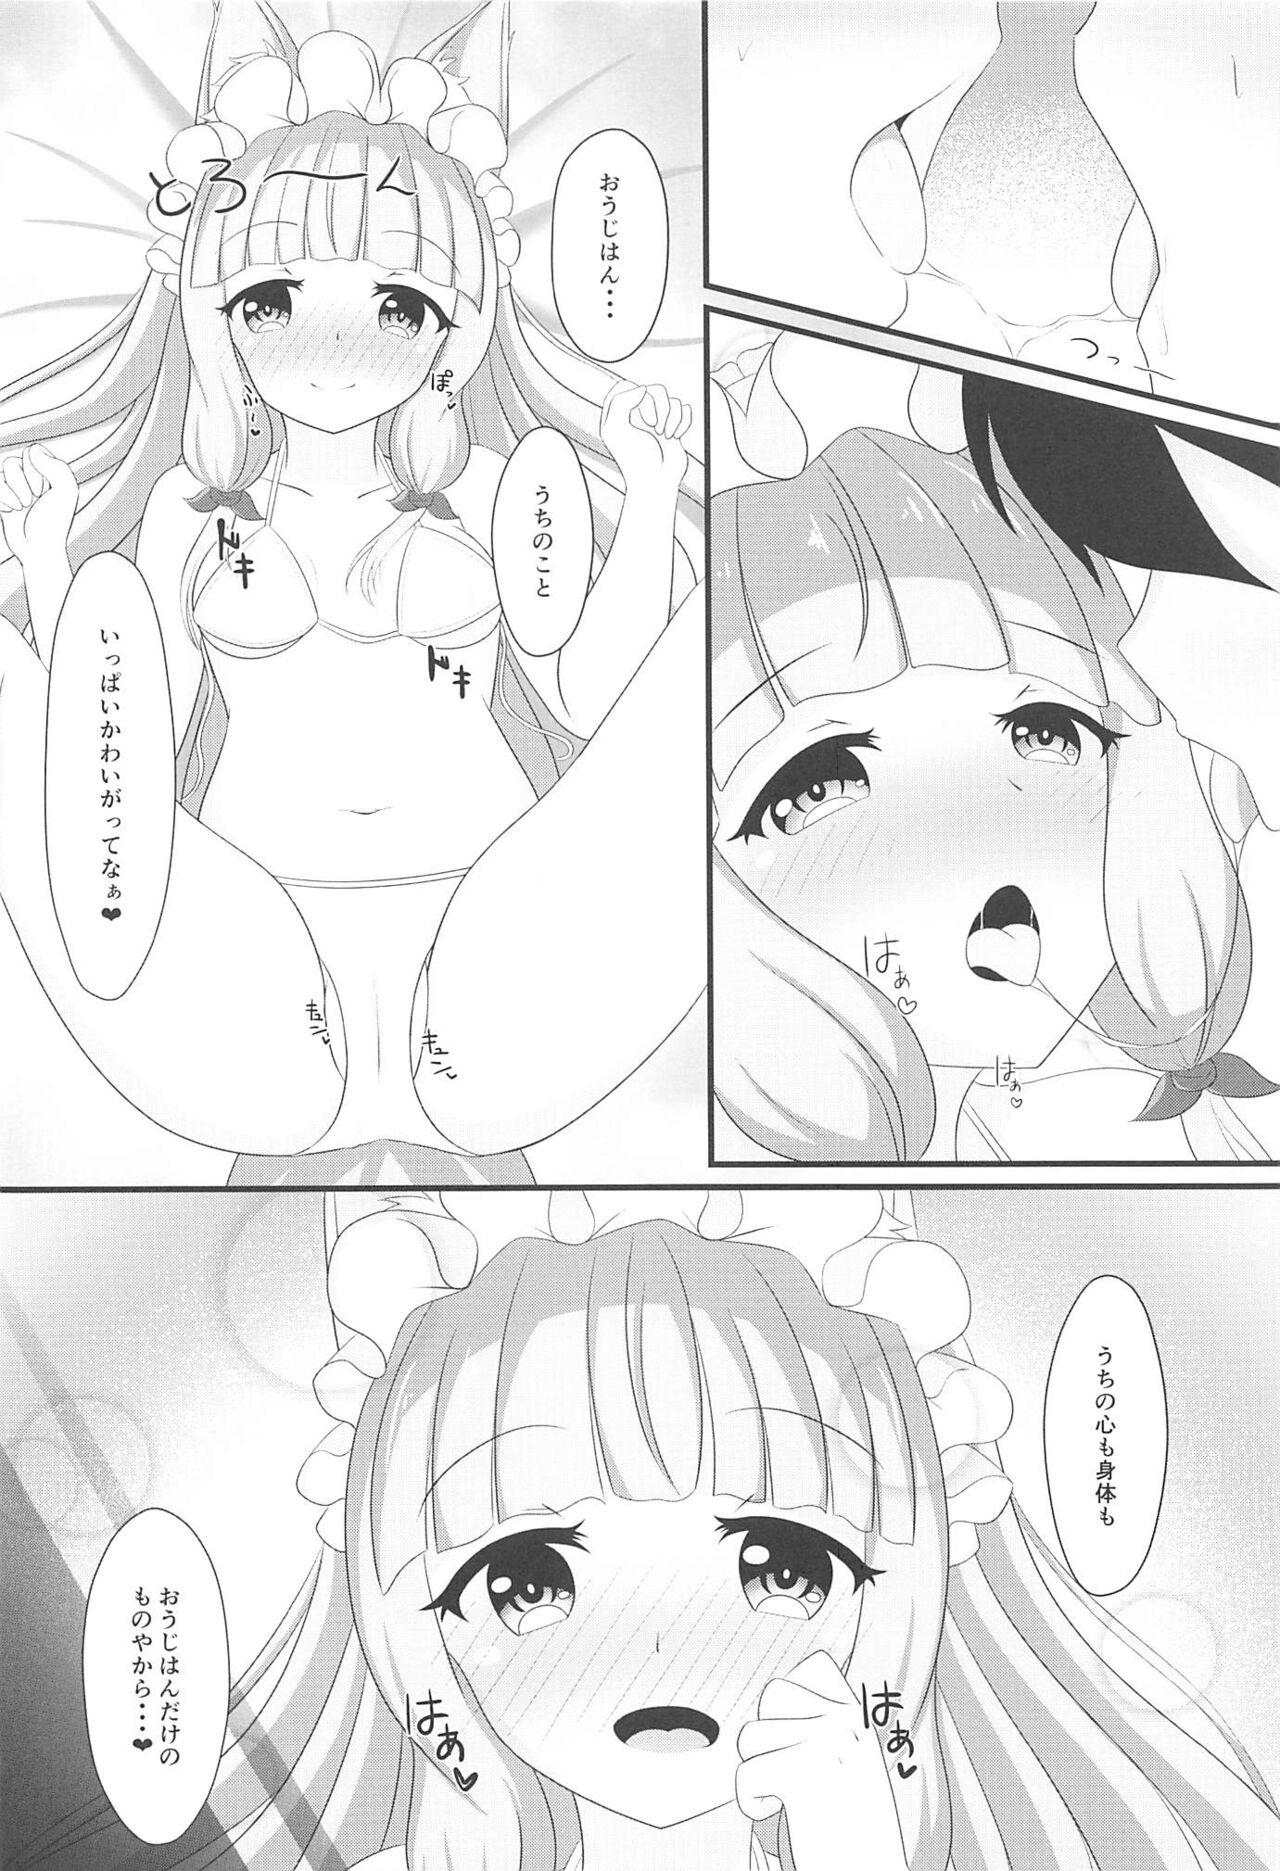 Teenage Maho Hime Connect! 2 - Princess connect Blowjob Contest - Page 7